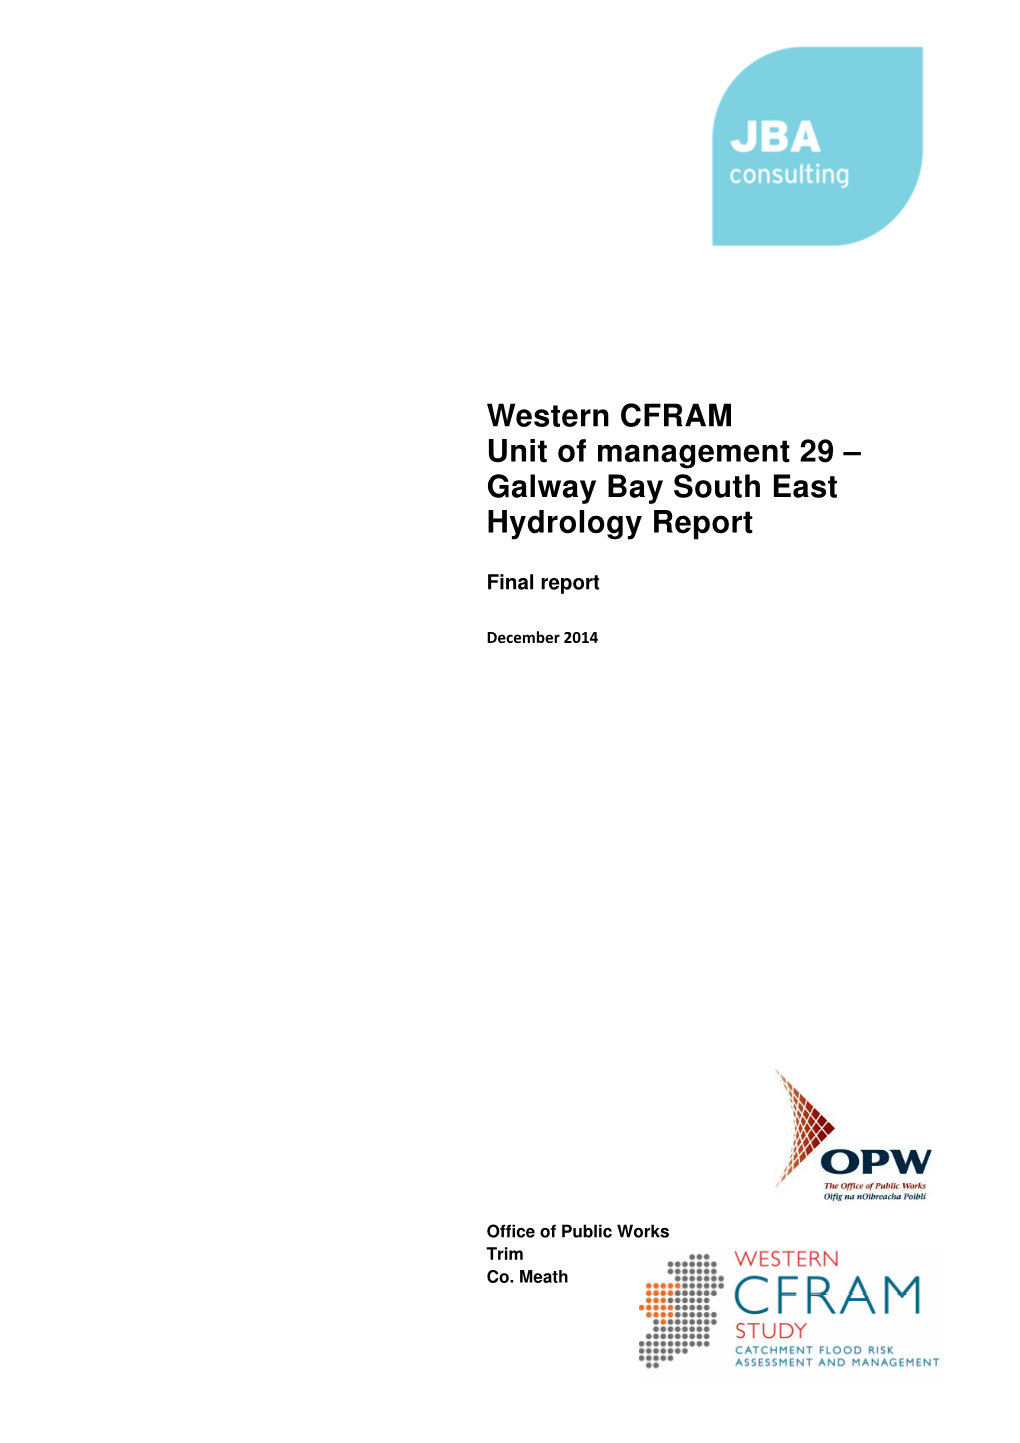 Galway Bay South East Hydrology Report